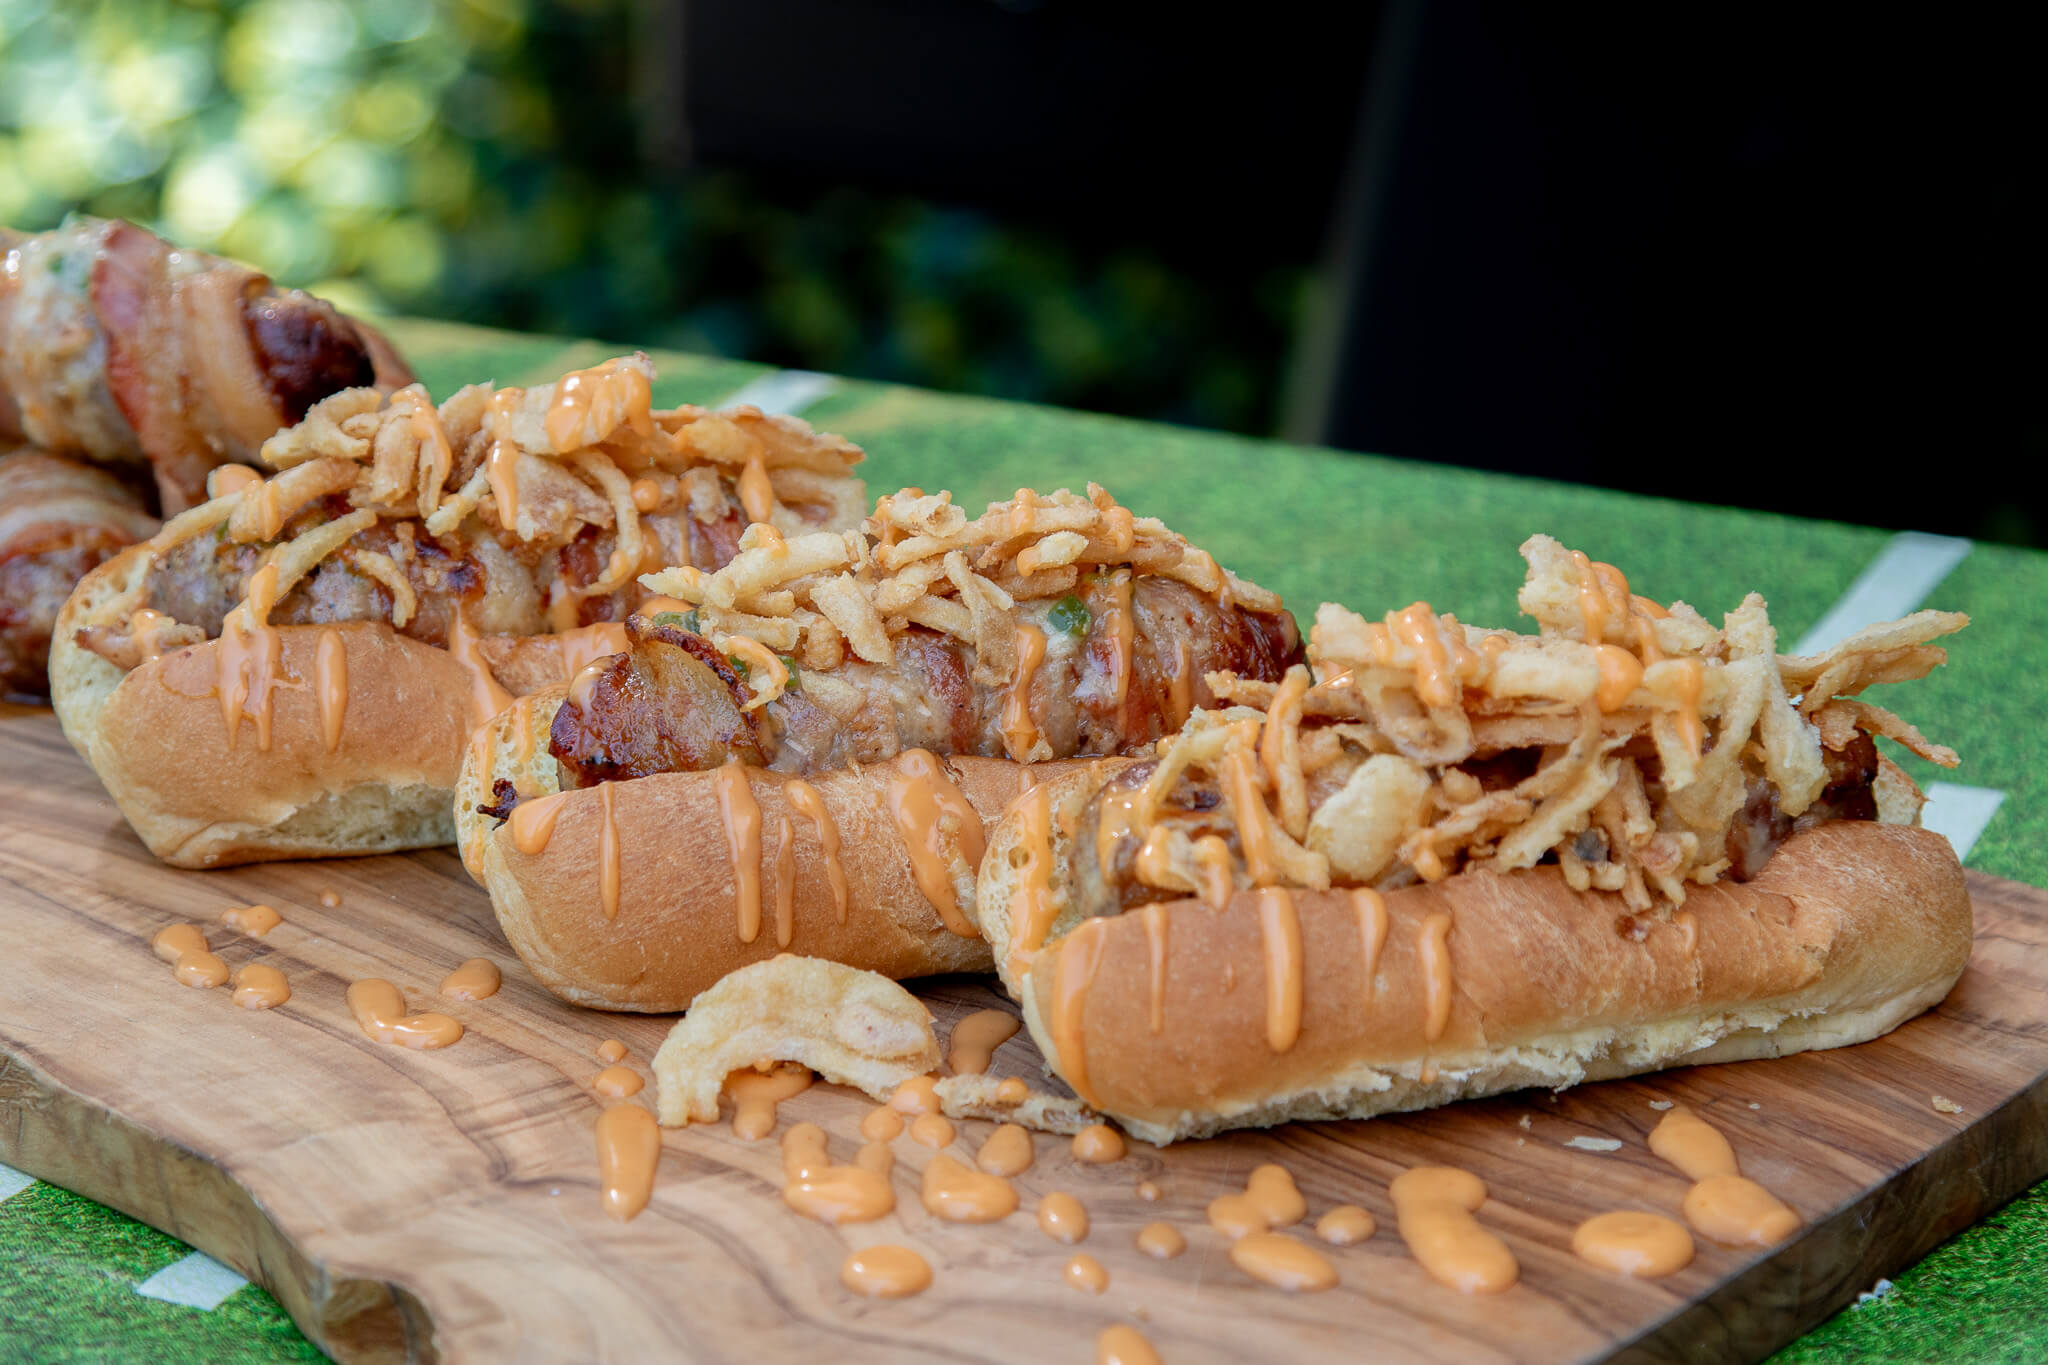 grilled sausages wrapped in bacon and topped with fried onions and spicy mayo on wooden cutting board